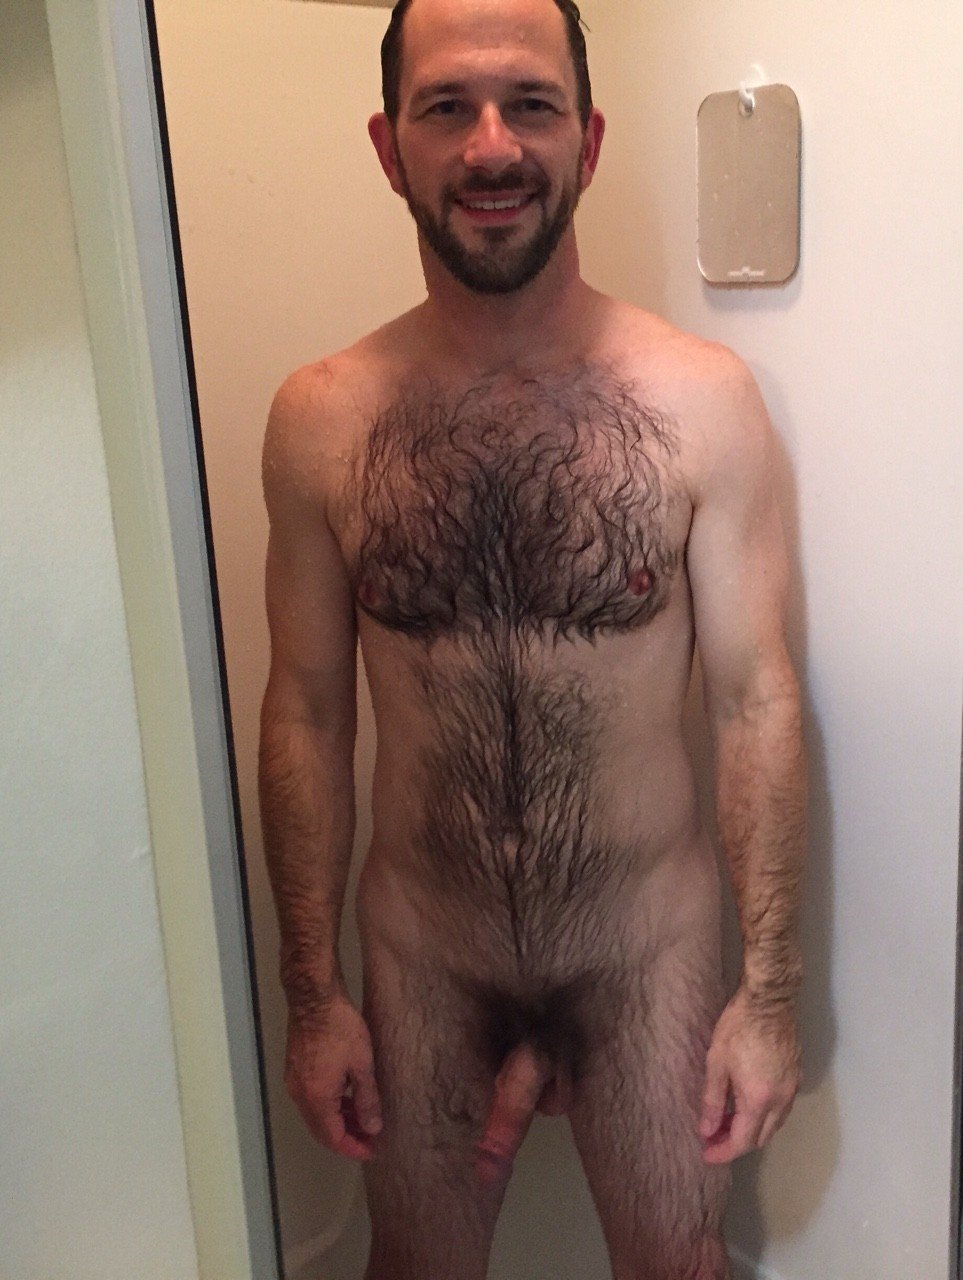 Photo by Smitty with the username @Resol702,  April 19, 2020 at 2:44 PM. The post is about the topic Gay Hairy Men